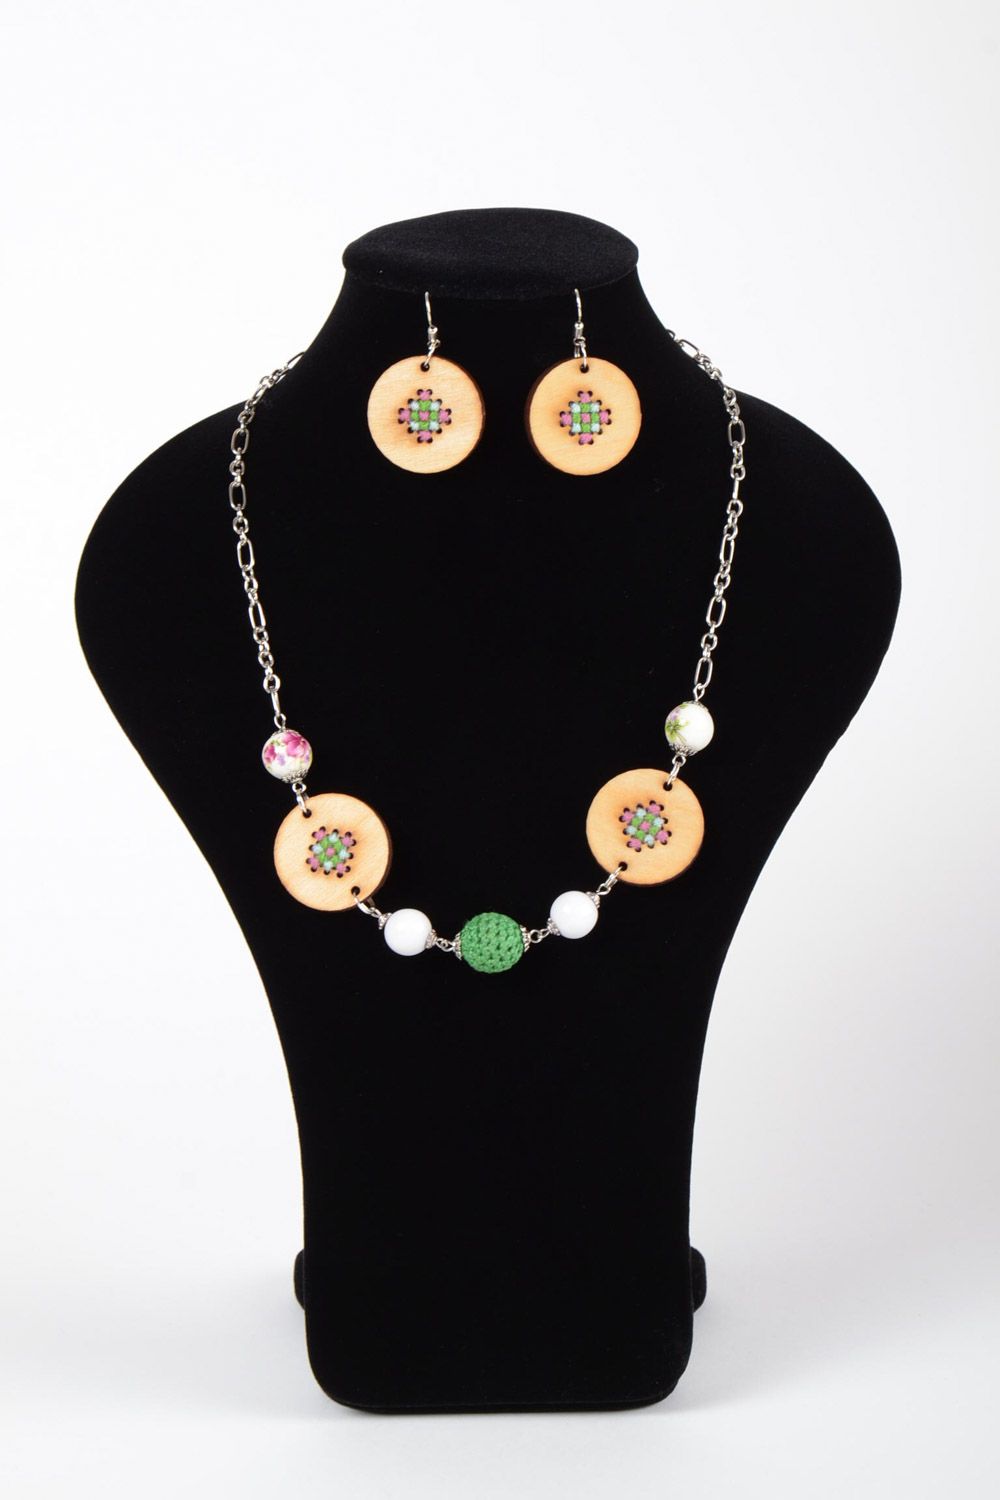 Handmade jewelery set made of plywood necklace and earrings with cross-stitch embroidery photo 2